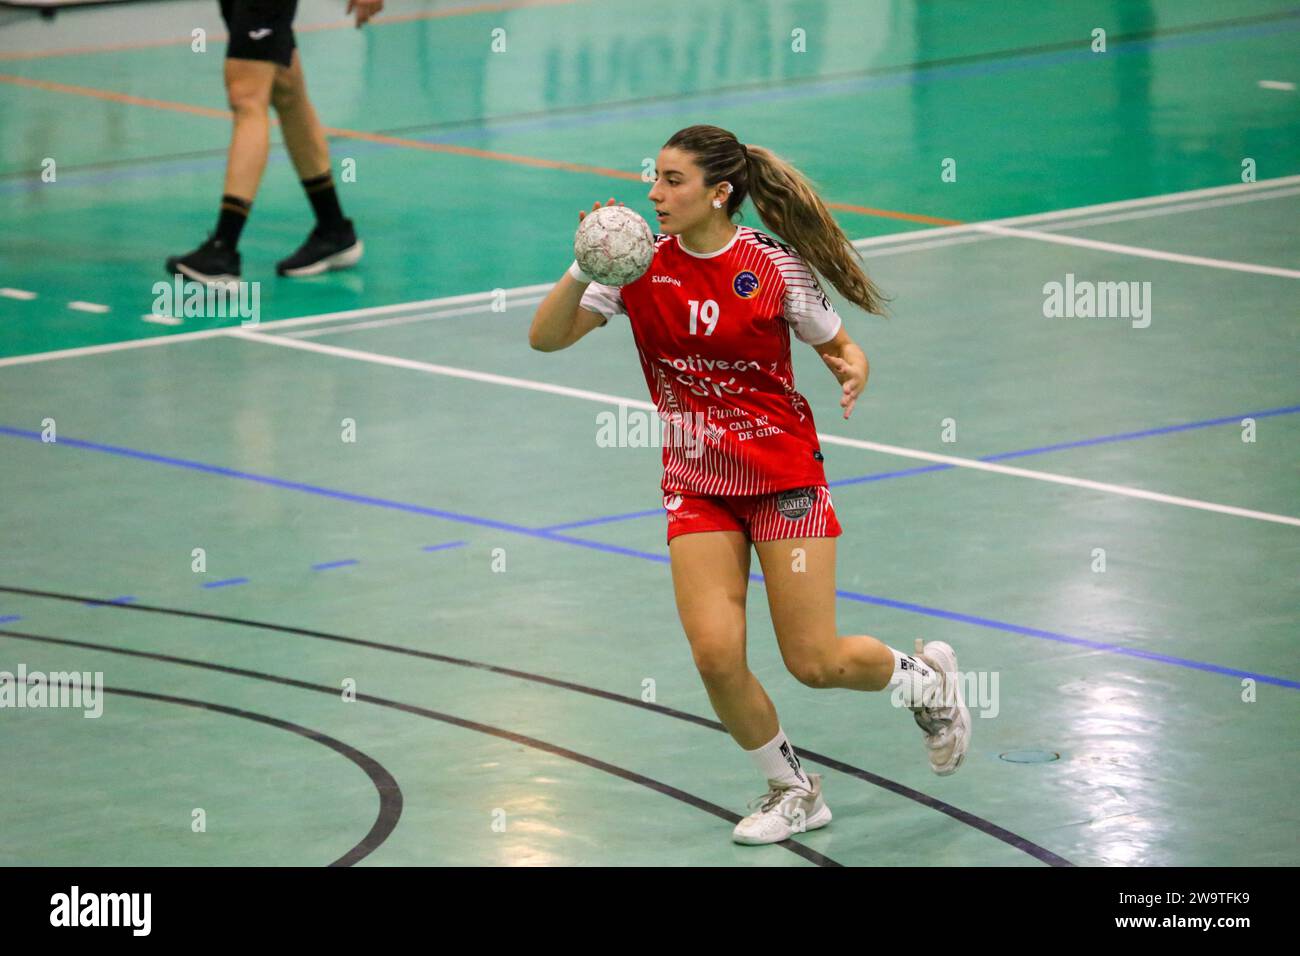 Gijon, Spain. 29th Dec, 2023. The player of Motive.co Gijon Balonmano La Calzada, Marta da Silva (19) with the ball during the 13th matchday of the Liga Guerreras Iberdrola 2023-24 between Motive.co Gijon Balonmano La Calzada and the Mecalia Atletico Guardes, on December 29, 2023, at the La Arena Pavilion, in Gijon, Spain. (Photo by Alberto Brevers/Pacific Press) Credit: Pacific Press Media Production Corp./Alamy Live News Stock Photo